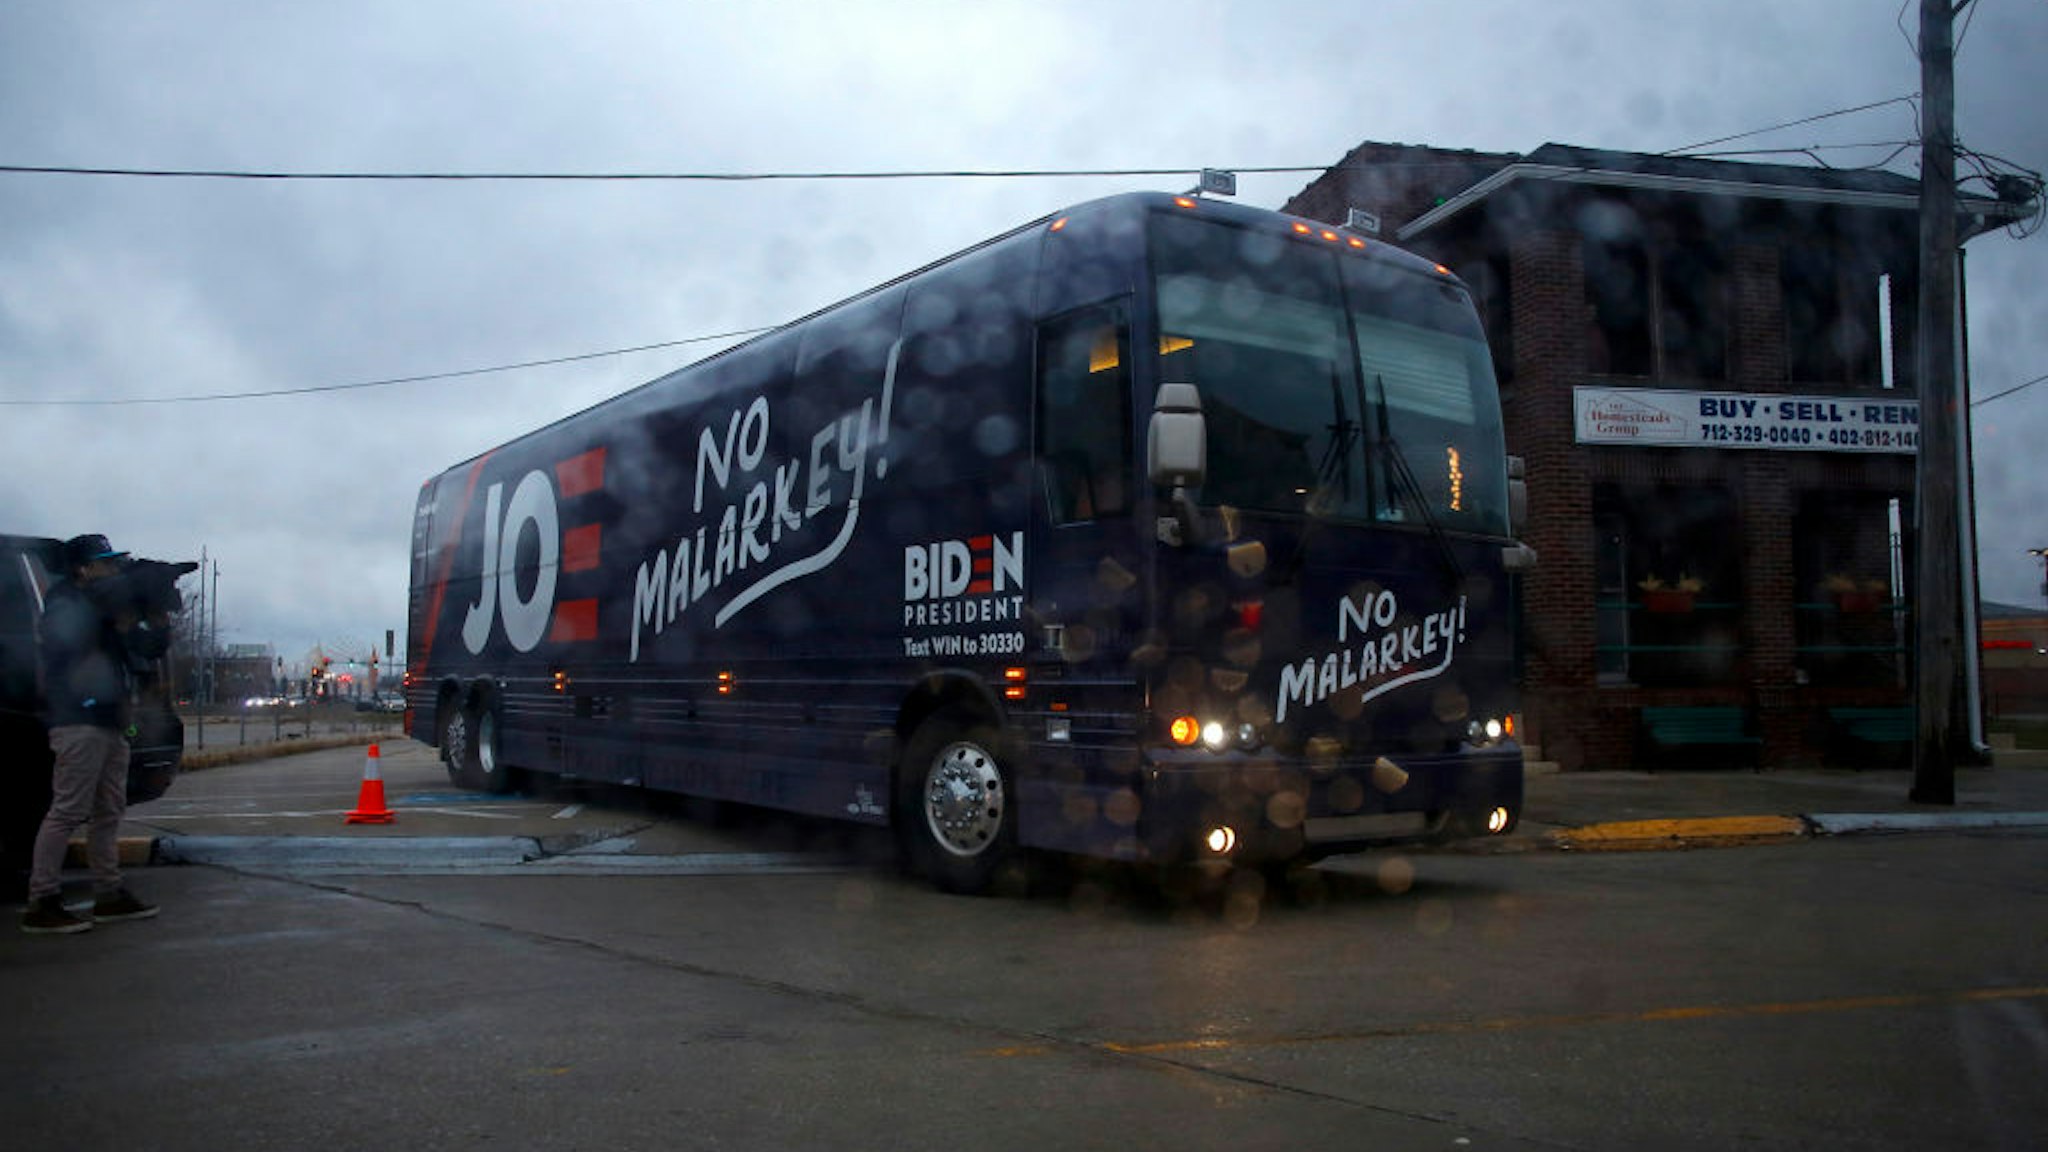 The bus of Democratic presidential candidate, former Vice President Joe Biden exits a parking lot after a campaign event on November 30, 2019 in Council Bluffs, Iowa.